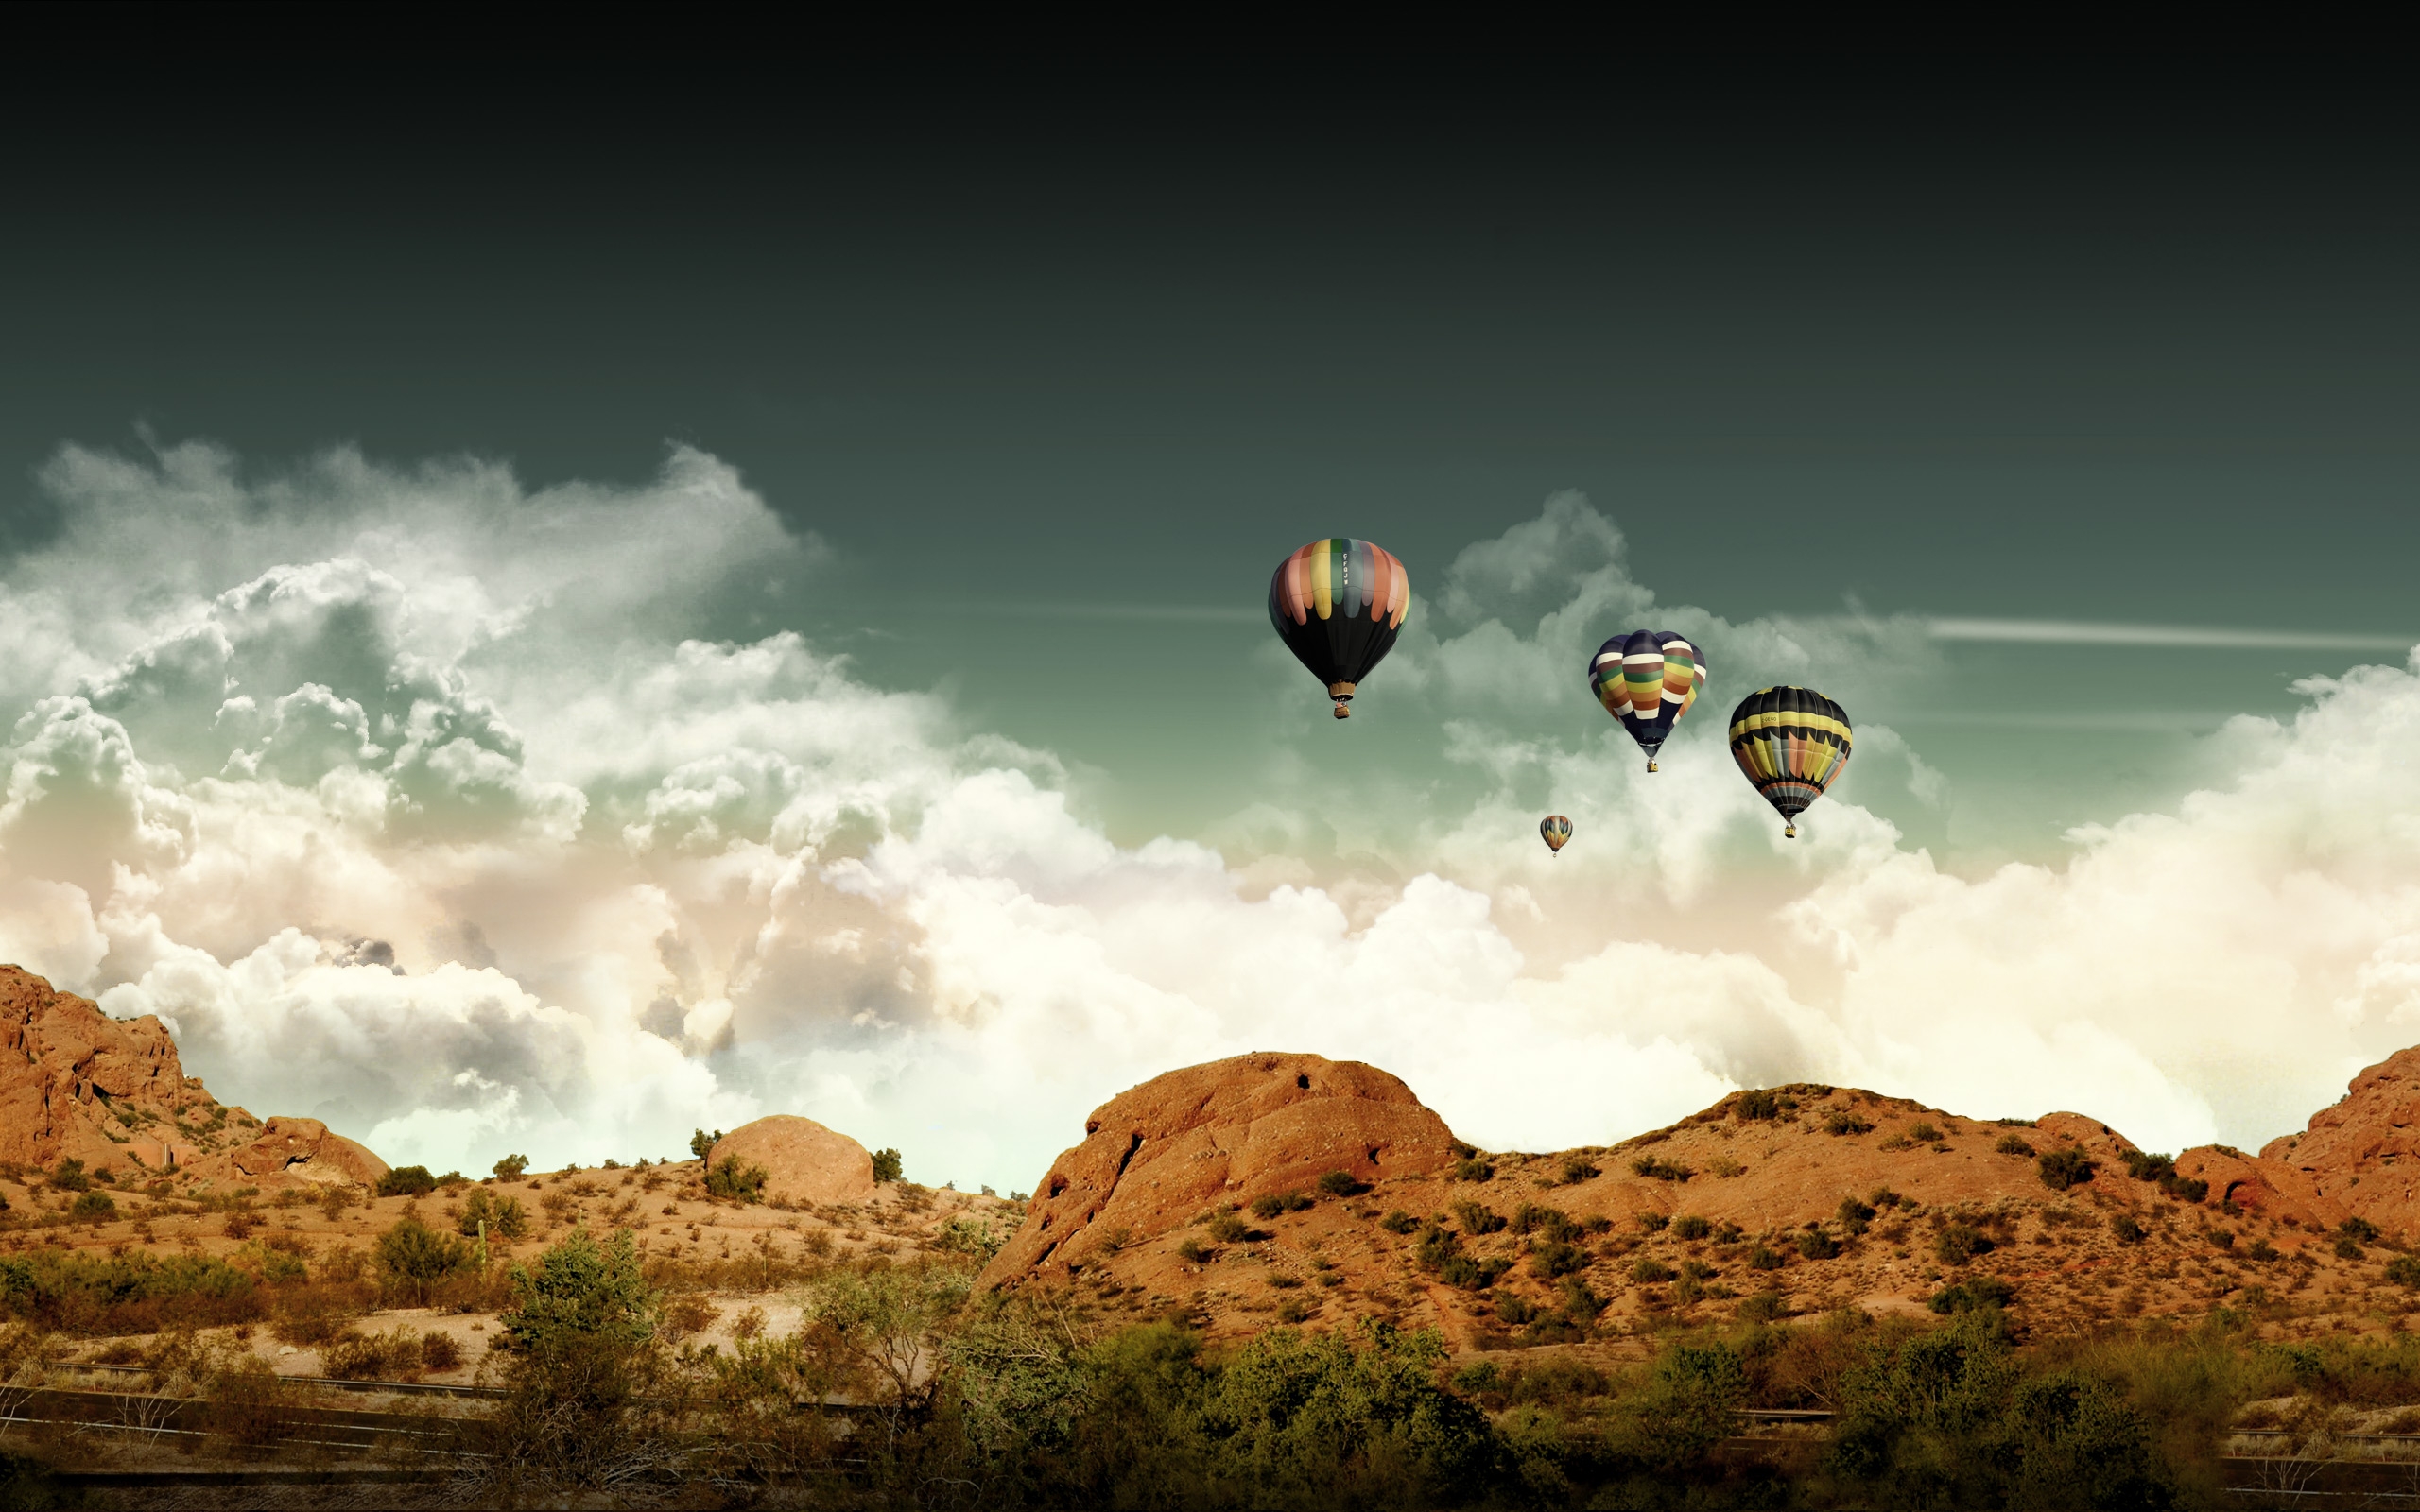 clouds, Landscapes, Desert, Hot, Air, Balloons, Skyscapes, Photomanipulations Wallpaper